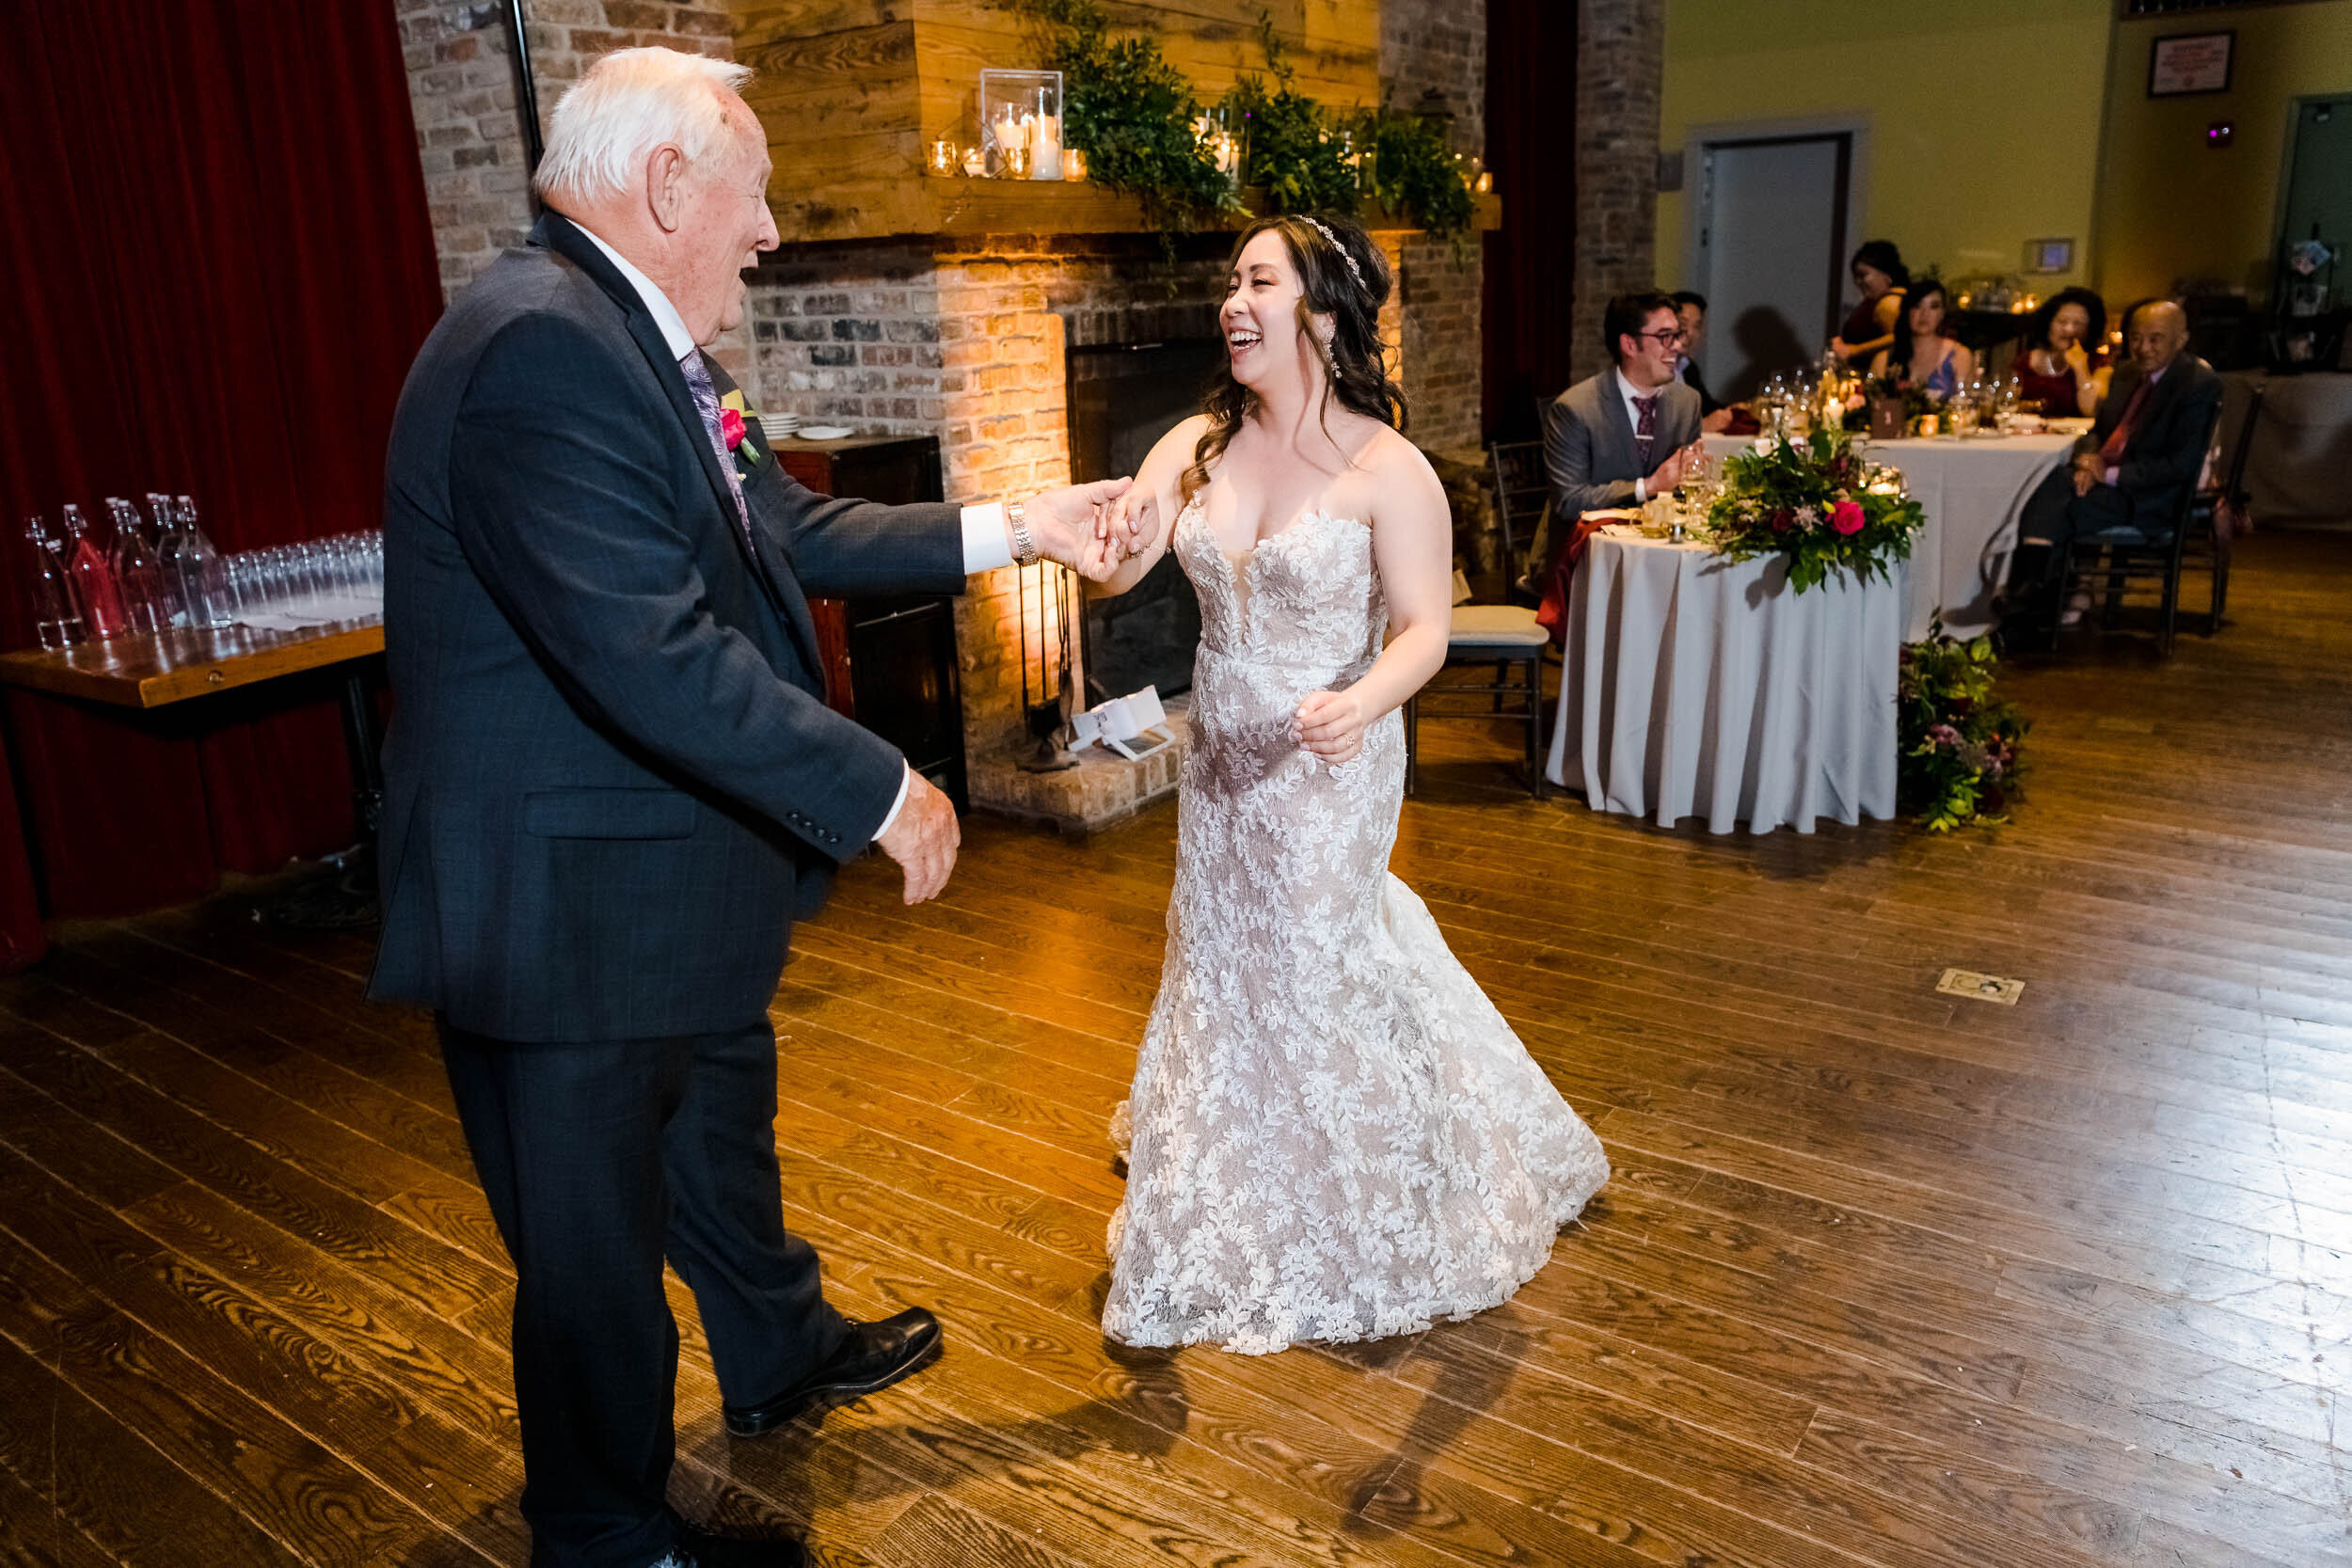 Top Wedding Photographers Near Me | City Winery | J. Brown Photography | bride and father dance during reception.